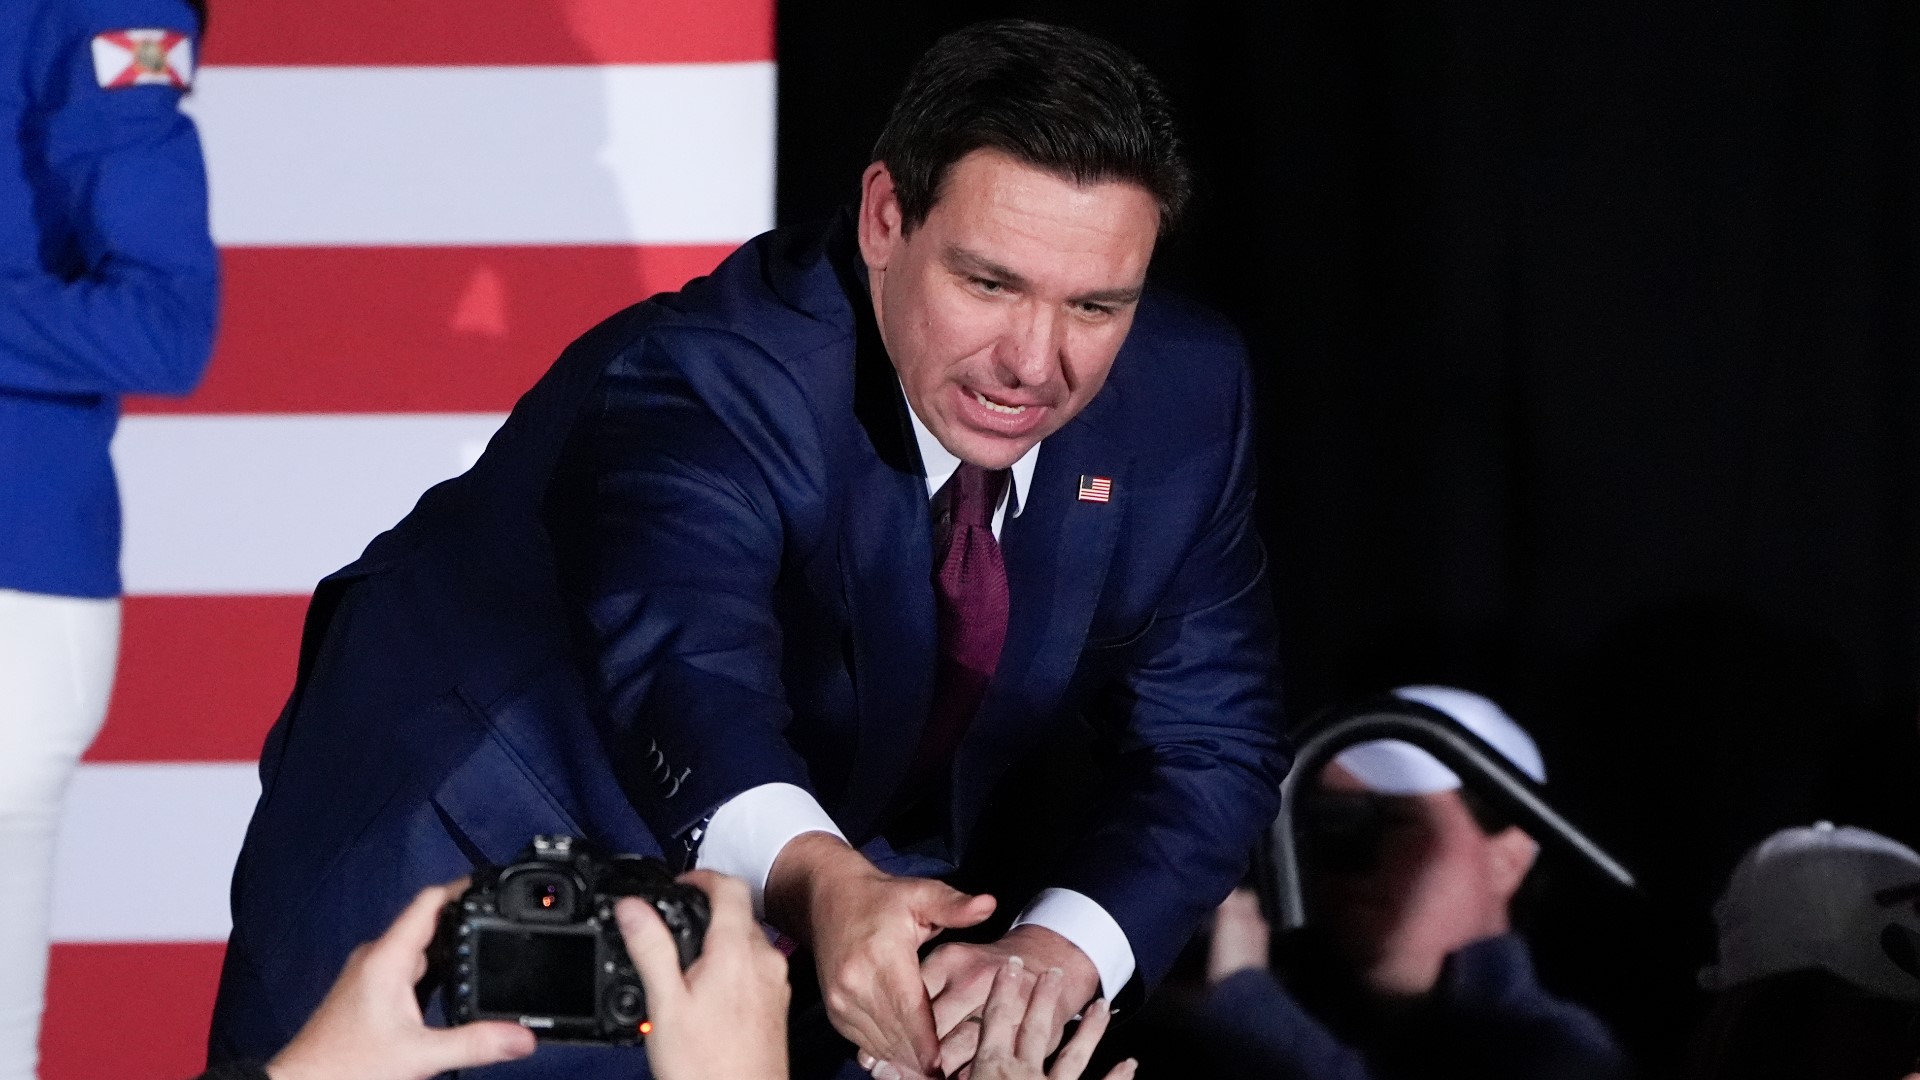 DeSantis announced his decision in a video posted on X, formerly known as Twitter.